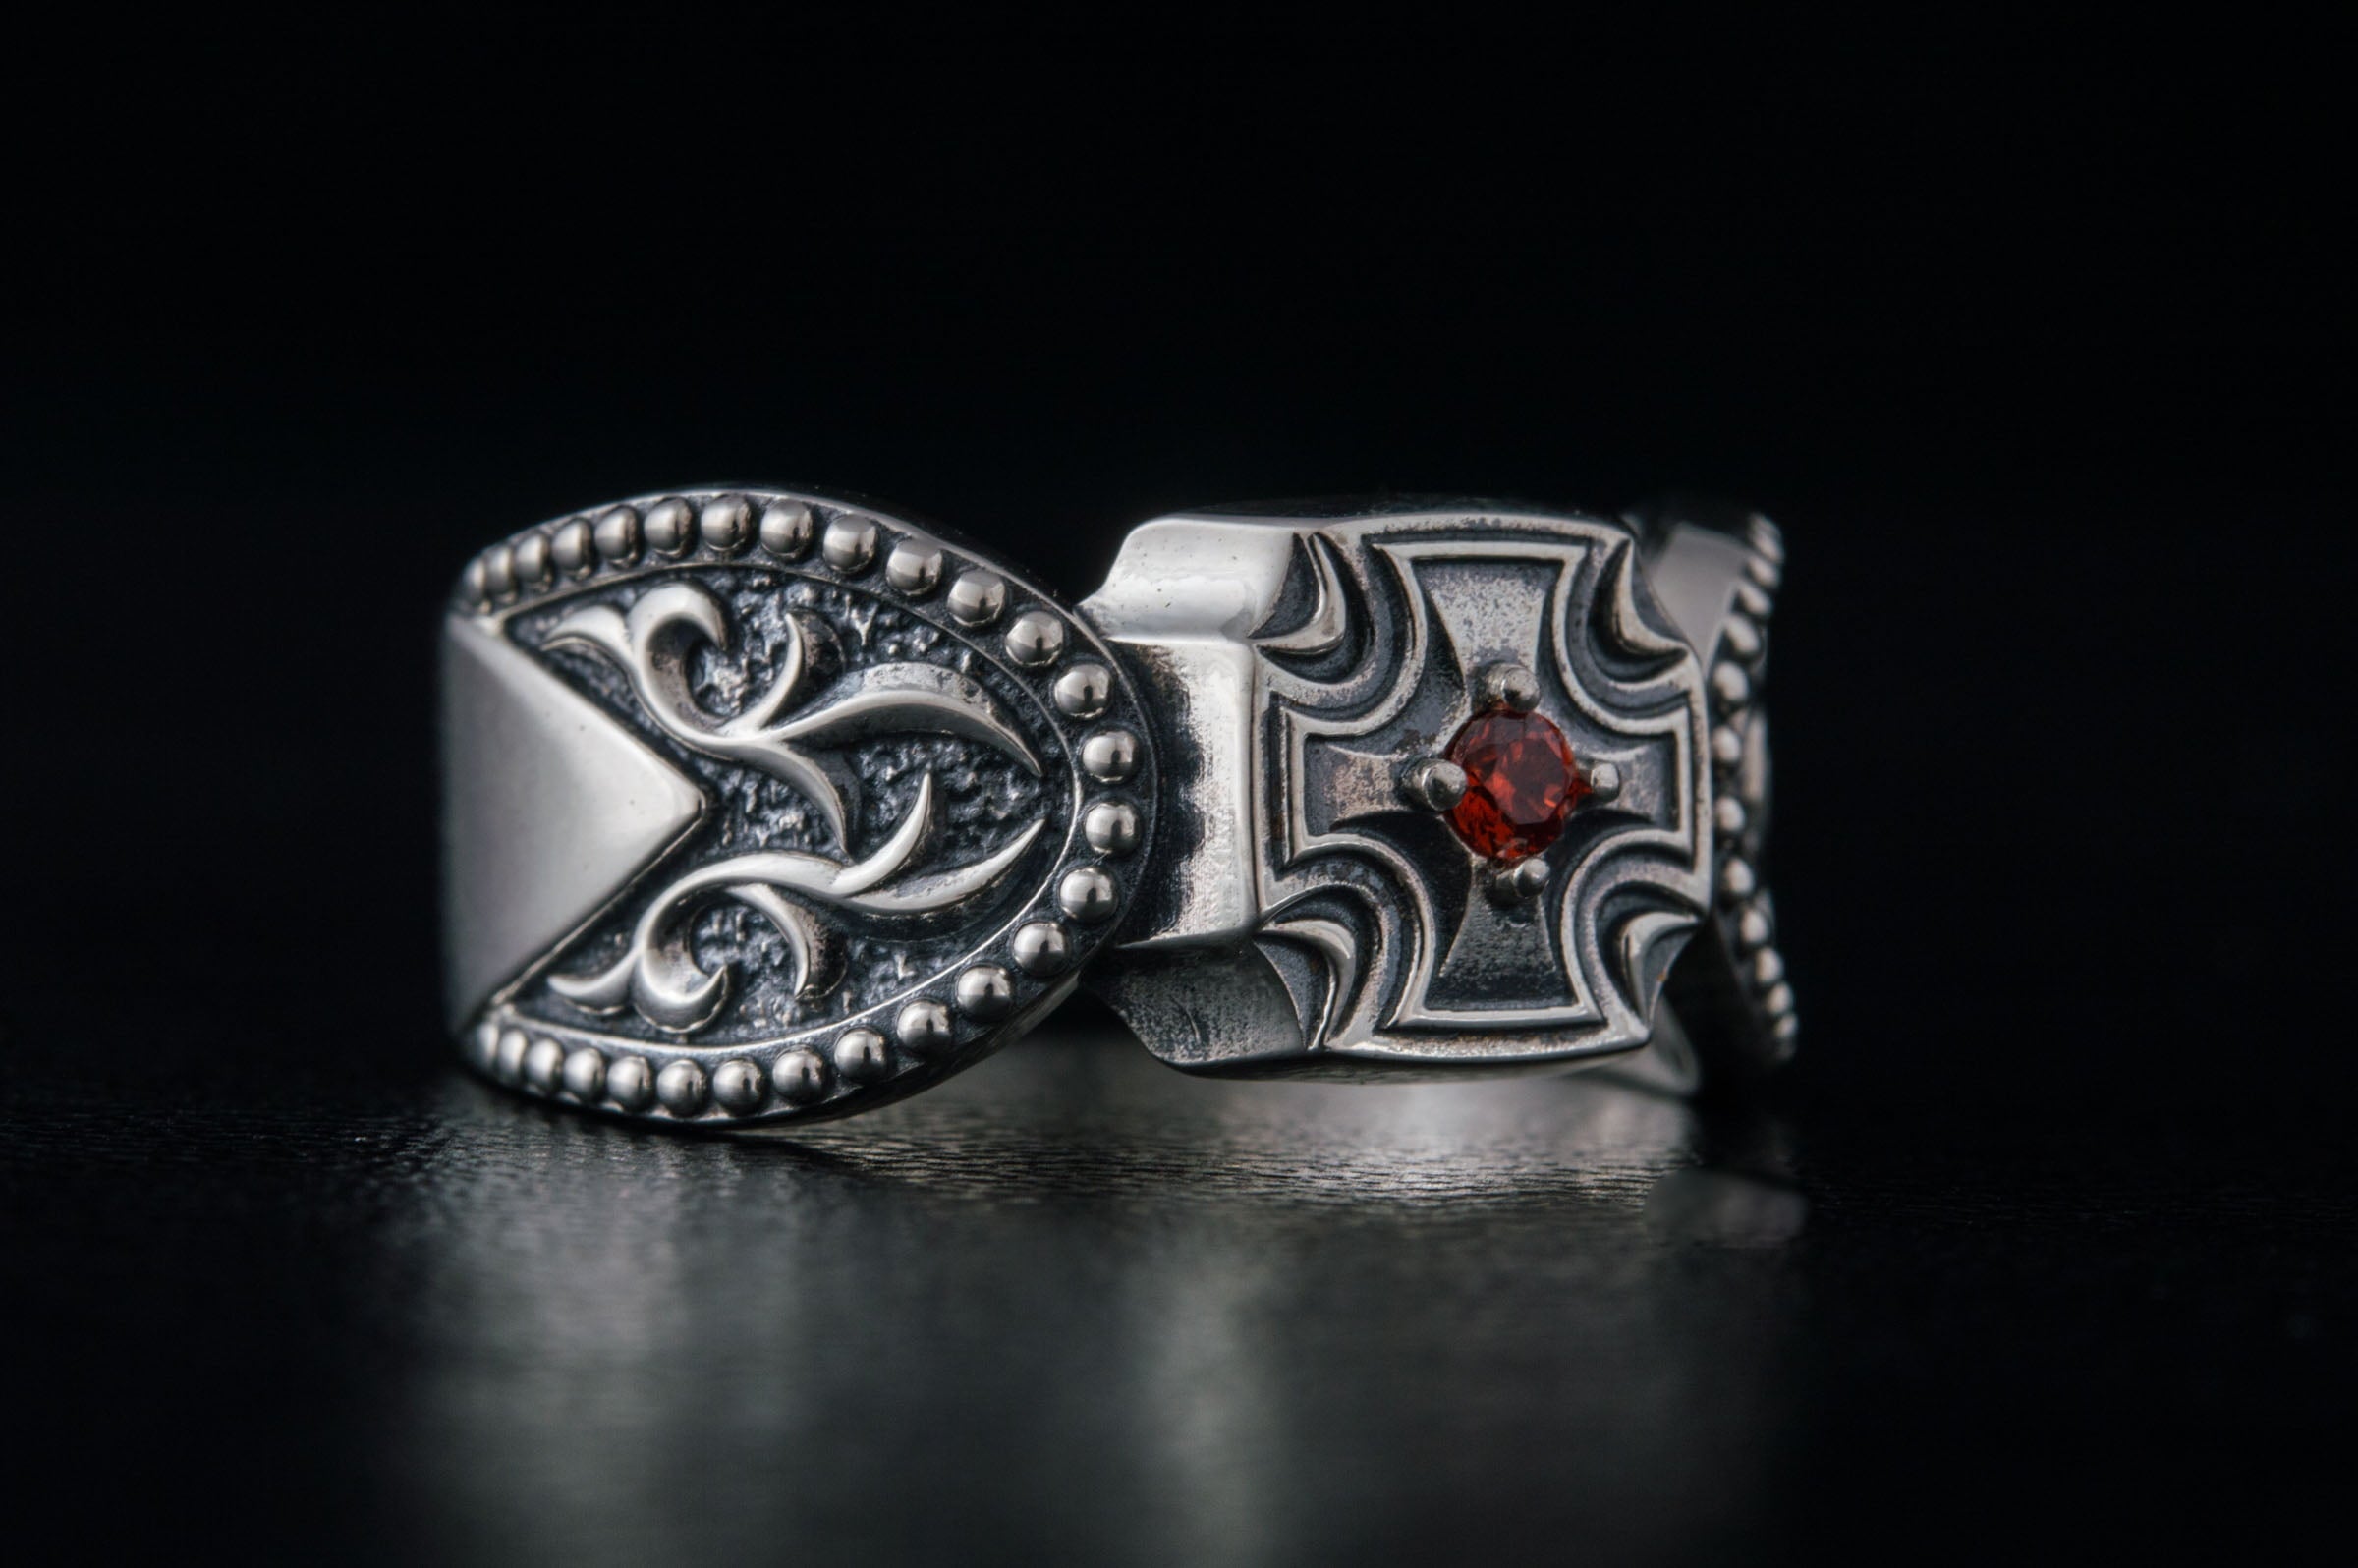 Maltese Cross Ring with Gem Sterling Silver Handmade Jewelry